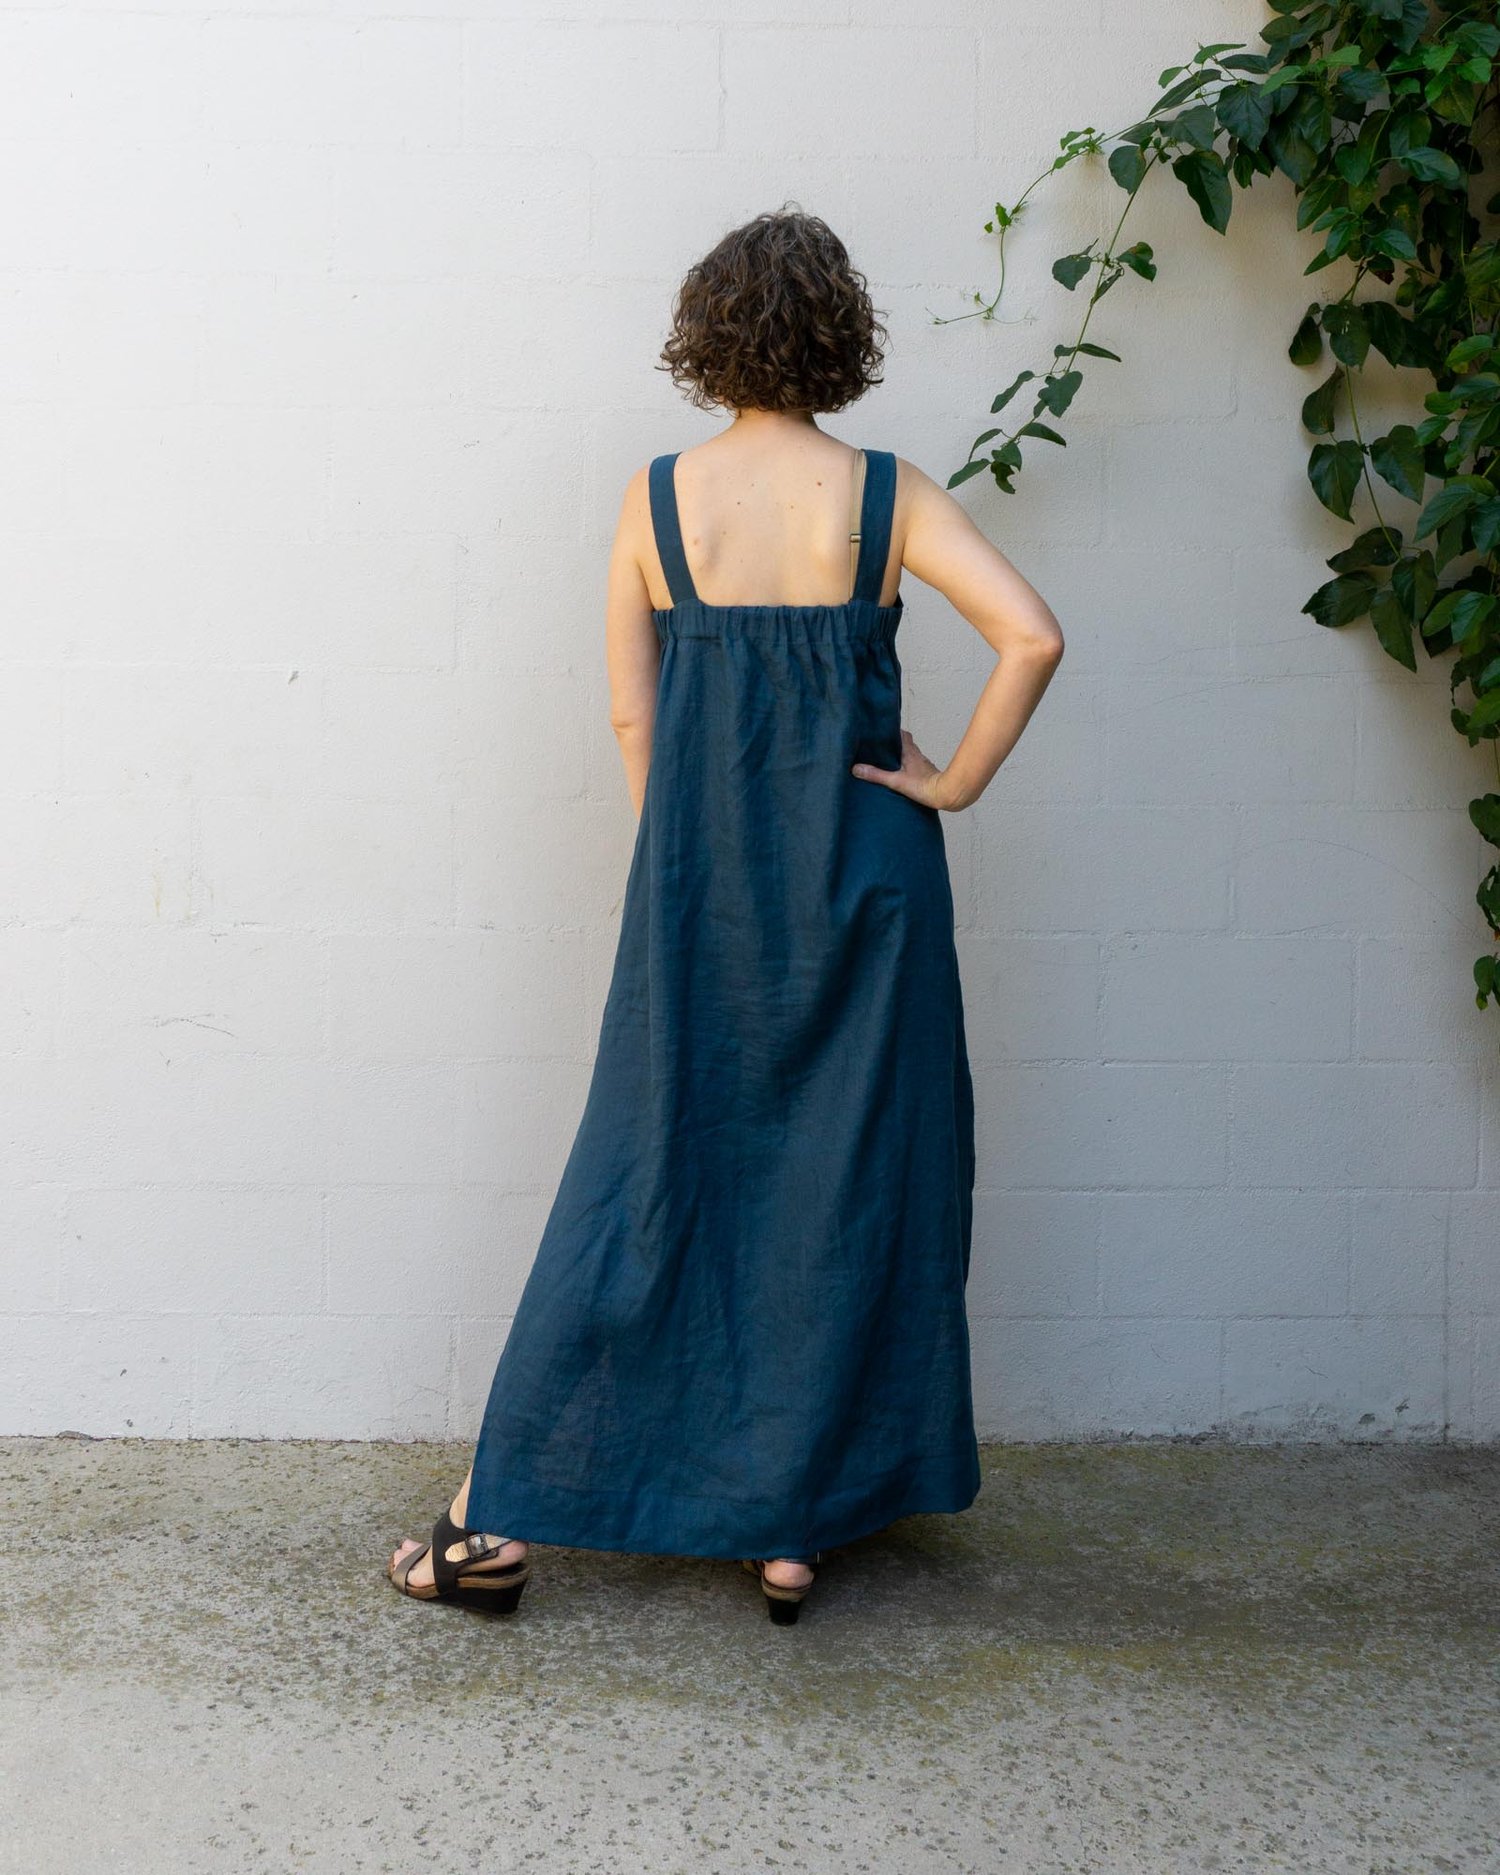 DIY Linen Maxi Dress—Review of the Wide-Strap Maxi Dress by Peppermint ...